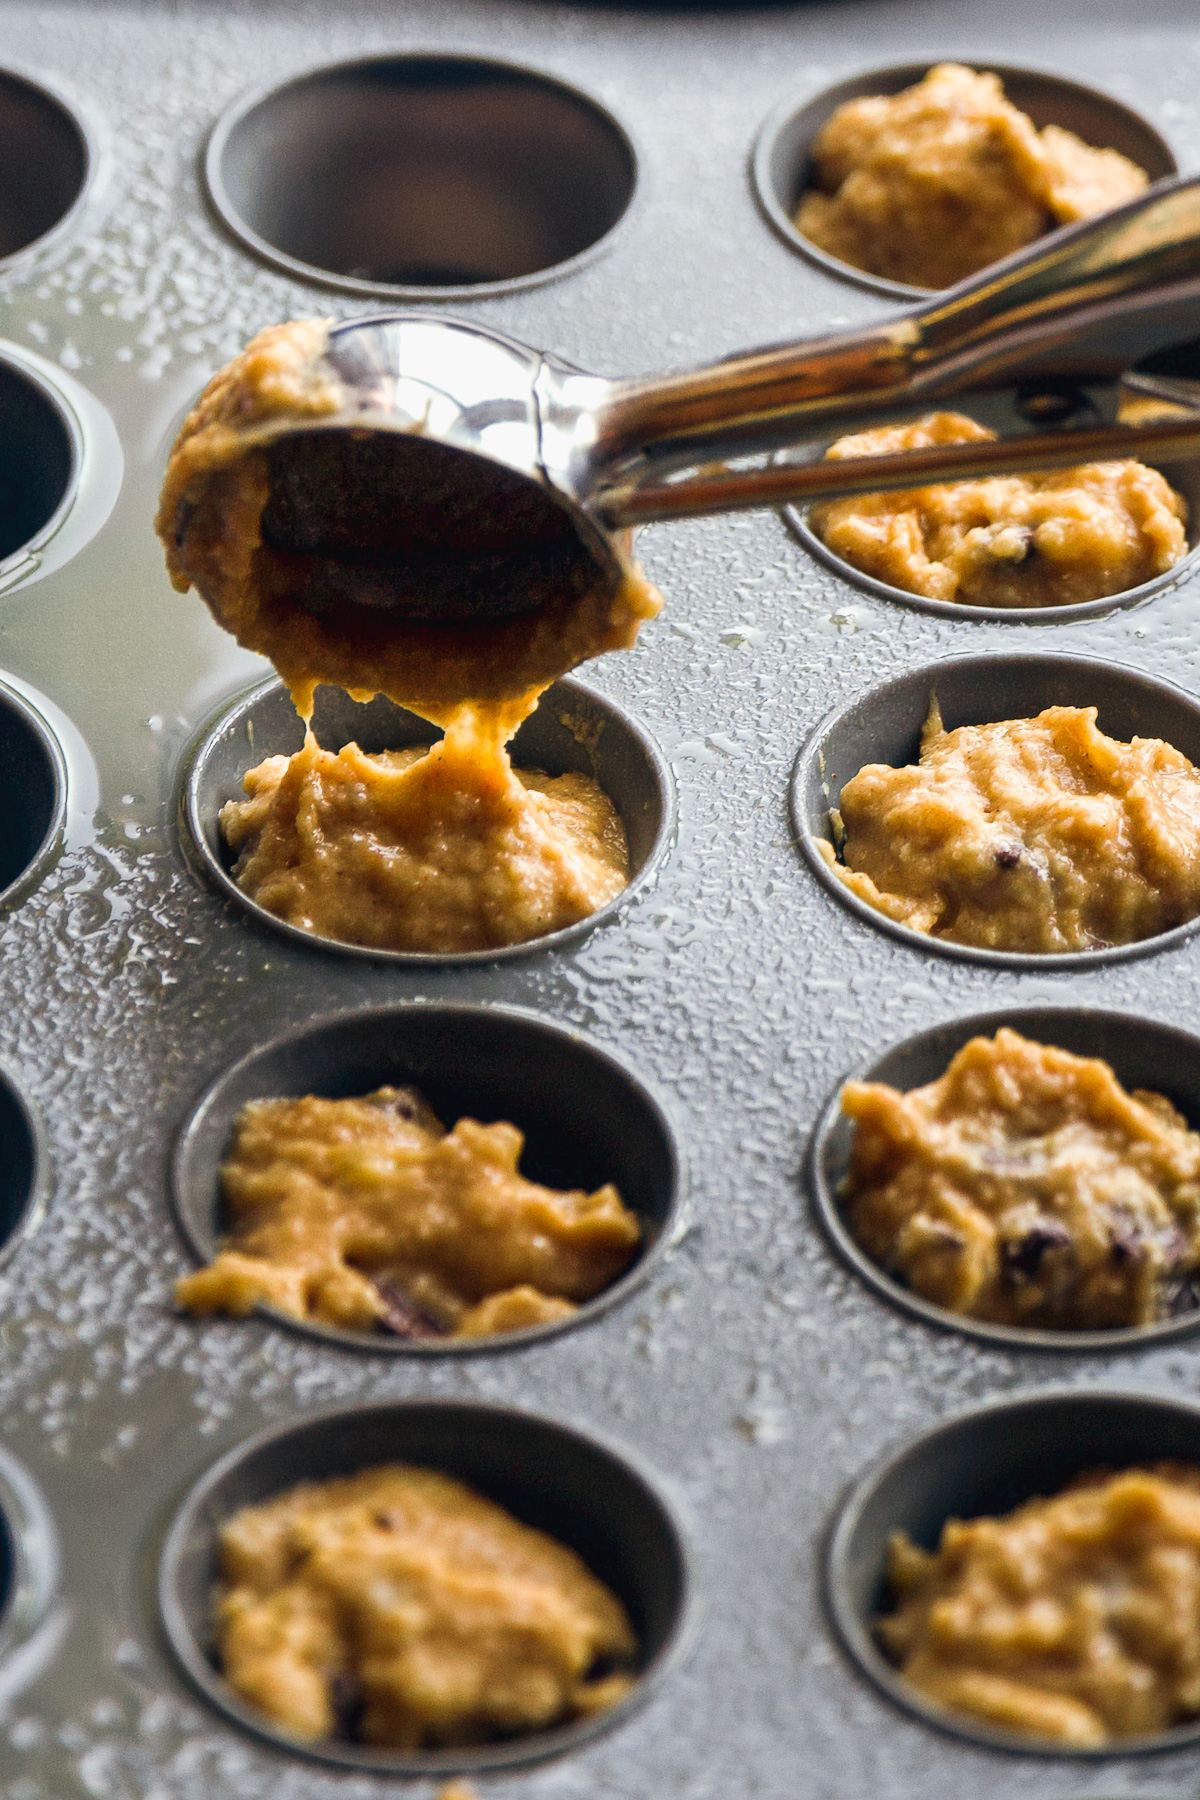 Muffin batter being poured into a mini muffin pan.